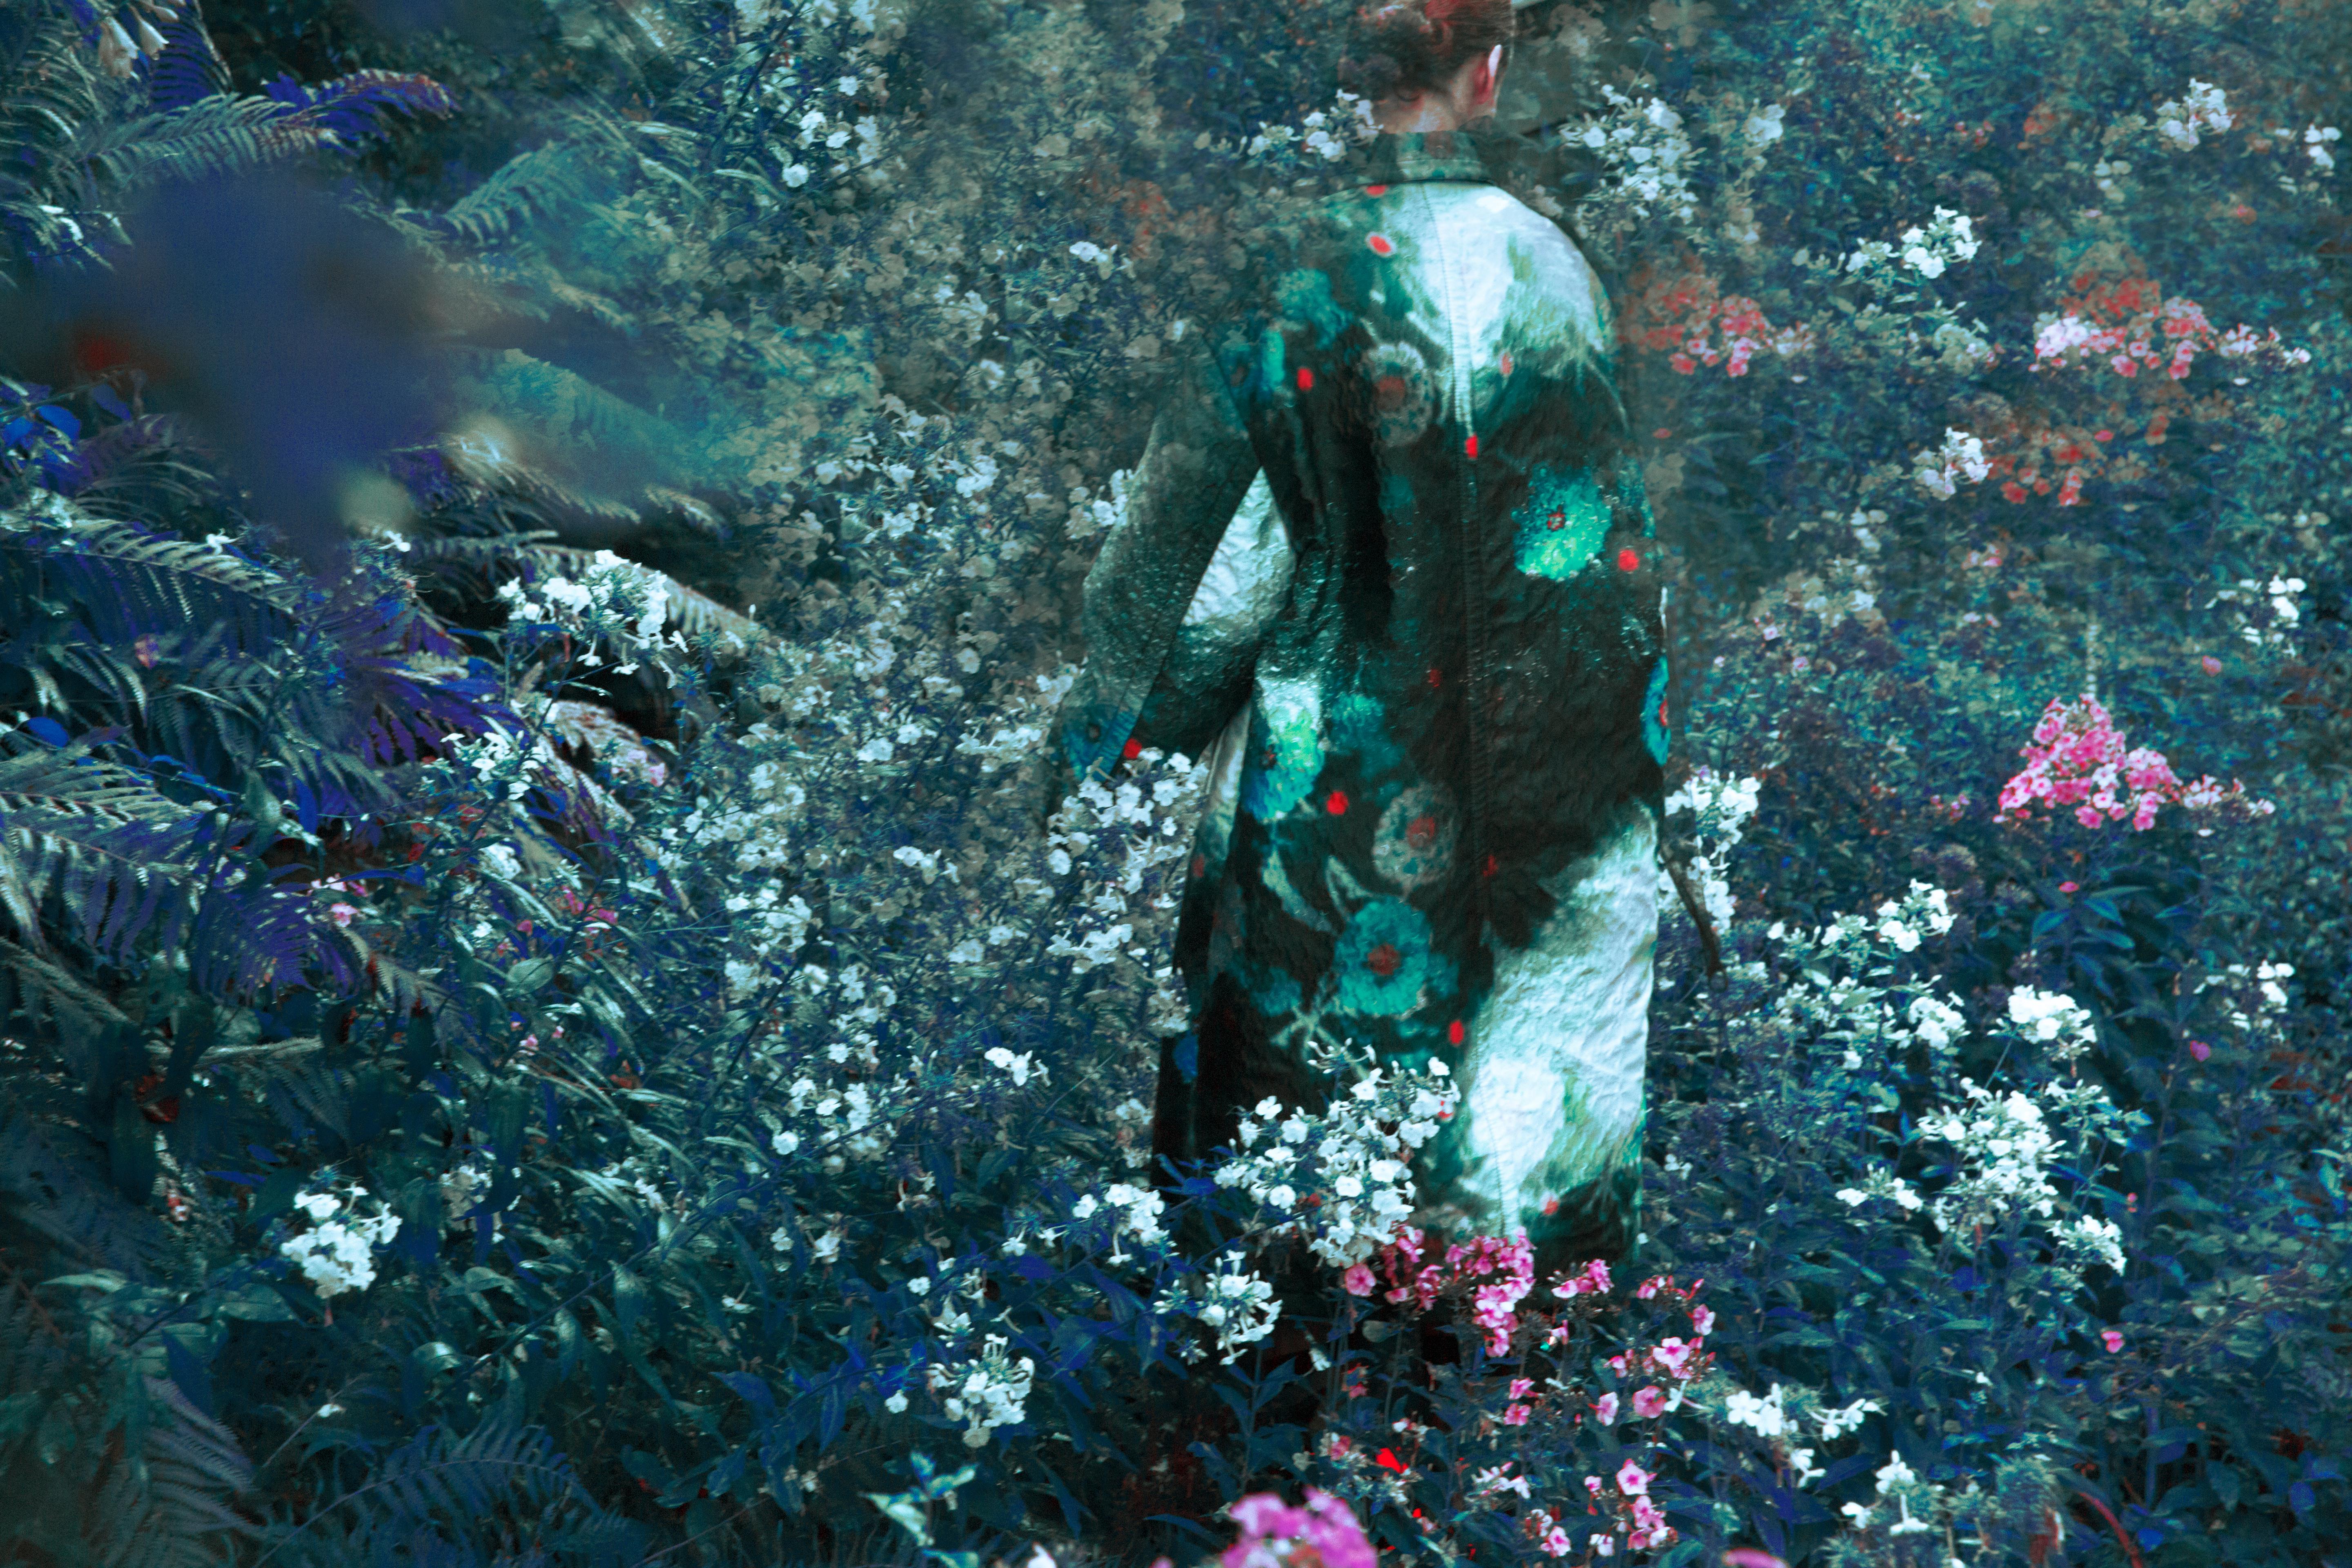 Erik MADIGAN HECK (*1983, United States)
Untitled 3, from the series 'The Garden', 2019
Chromogenic print
Sheet 101.6 x 152.4 cm (40 x 60 in.)
Frame 104.5 x 156 x 5 cm (41 1/8 x 61 3/8 x 2 in.)
Edition of 9, plus 2 AP; Ed. no. 1/9
print